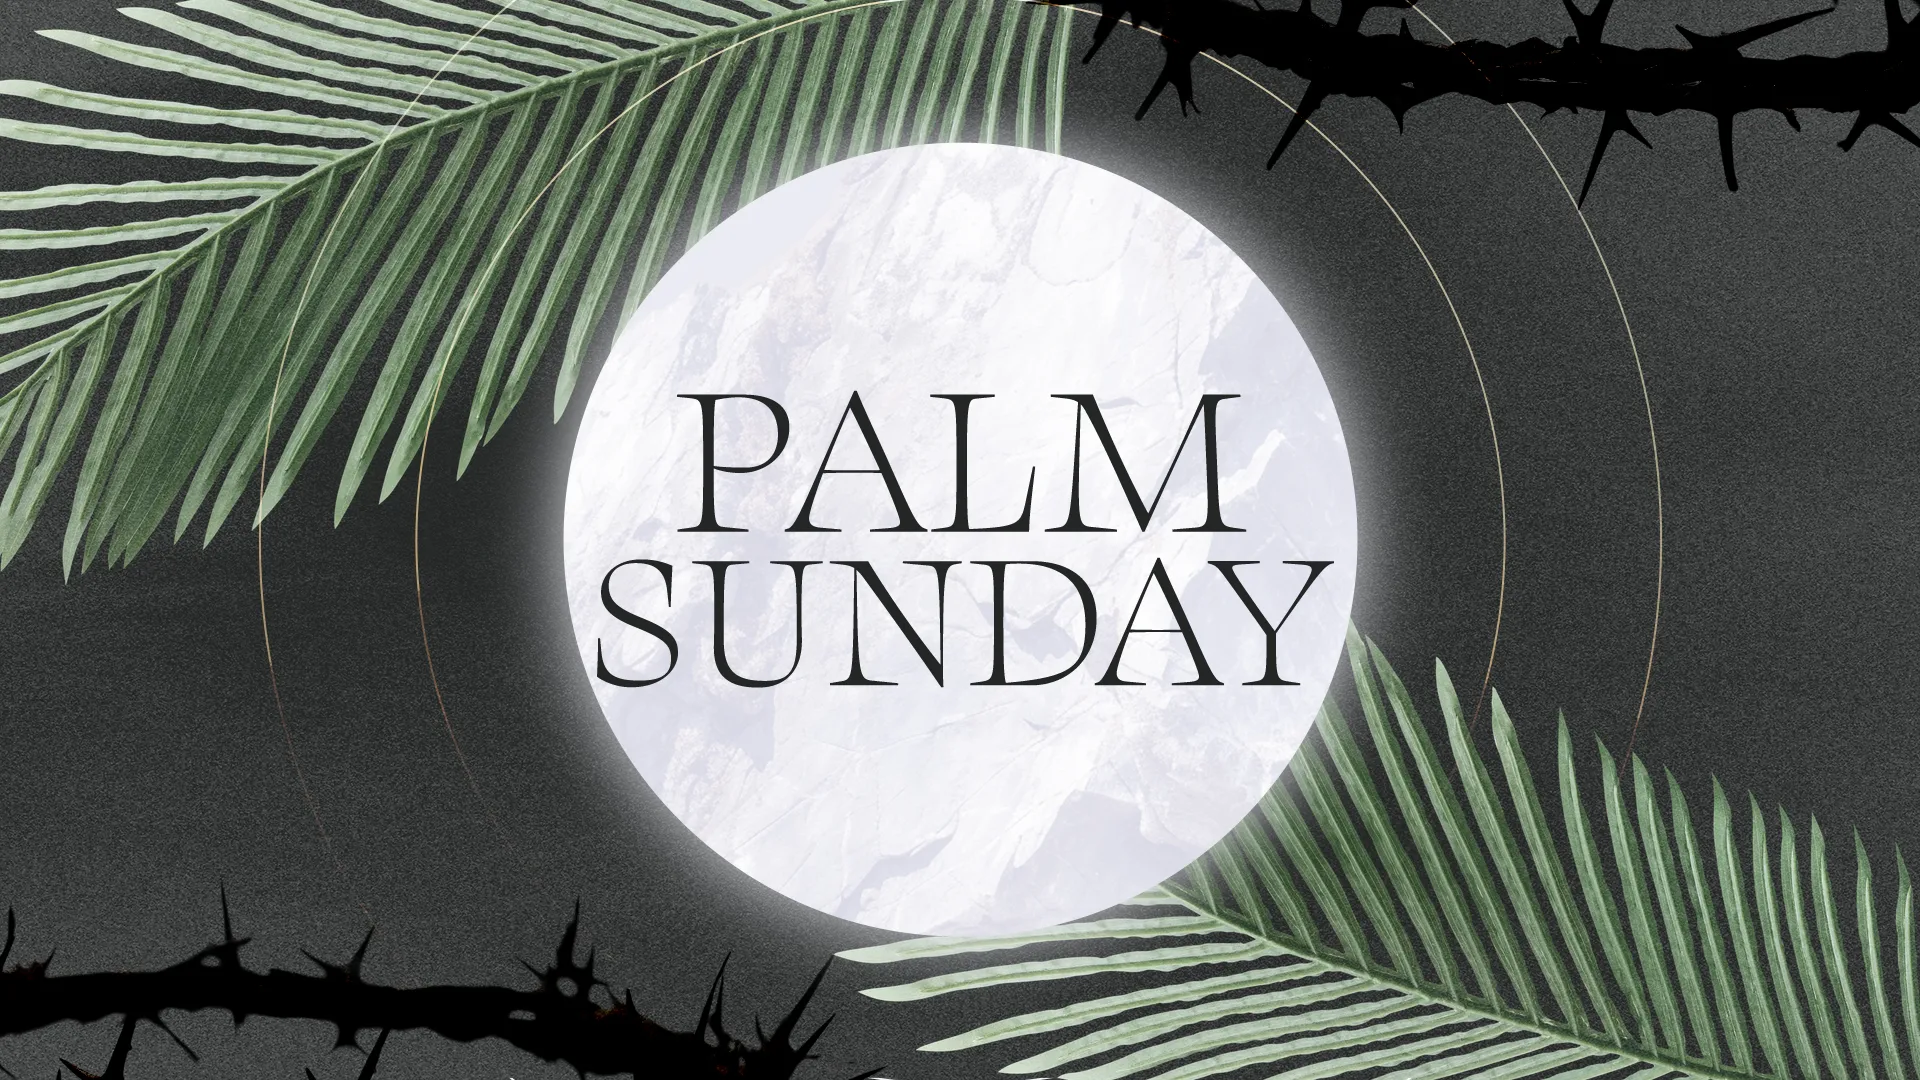 Celebrate Palm Sunday With This Serene And Symbolic Graphic, Perfect For Inviting Your Congregation To Remember The Triumphant Entry Of Jesus Into Jerusalem.